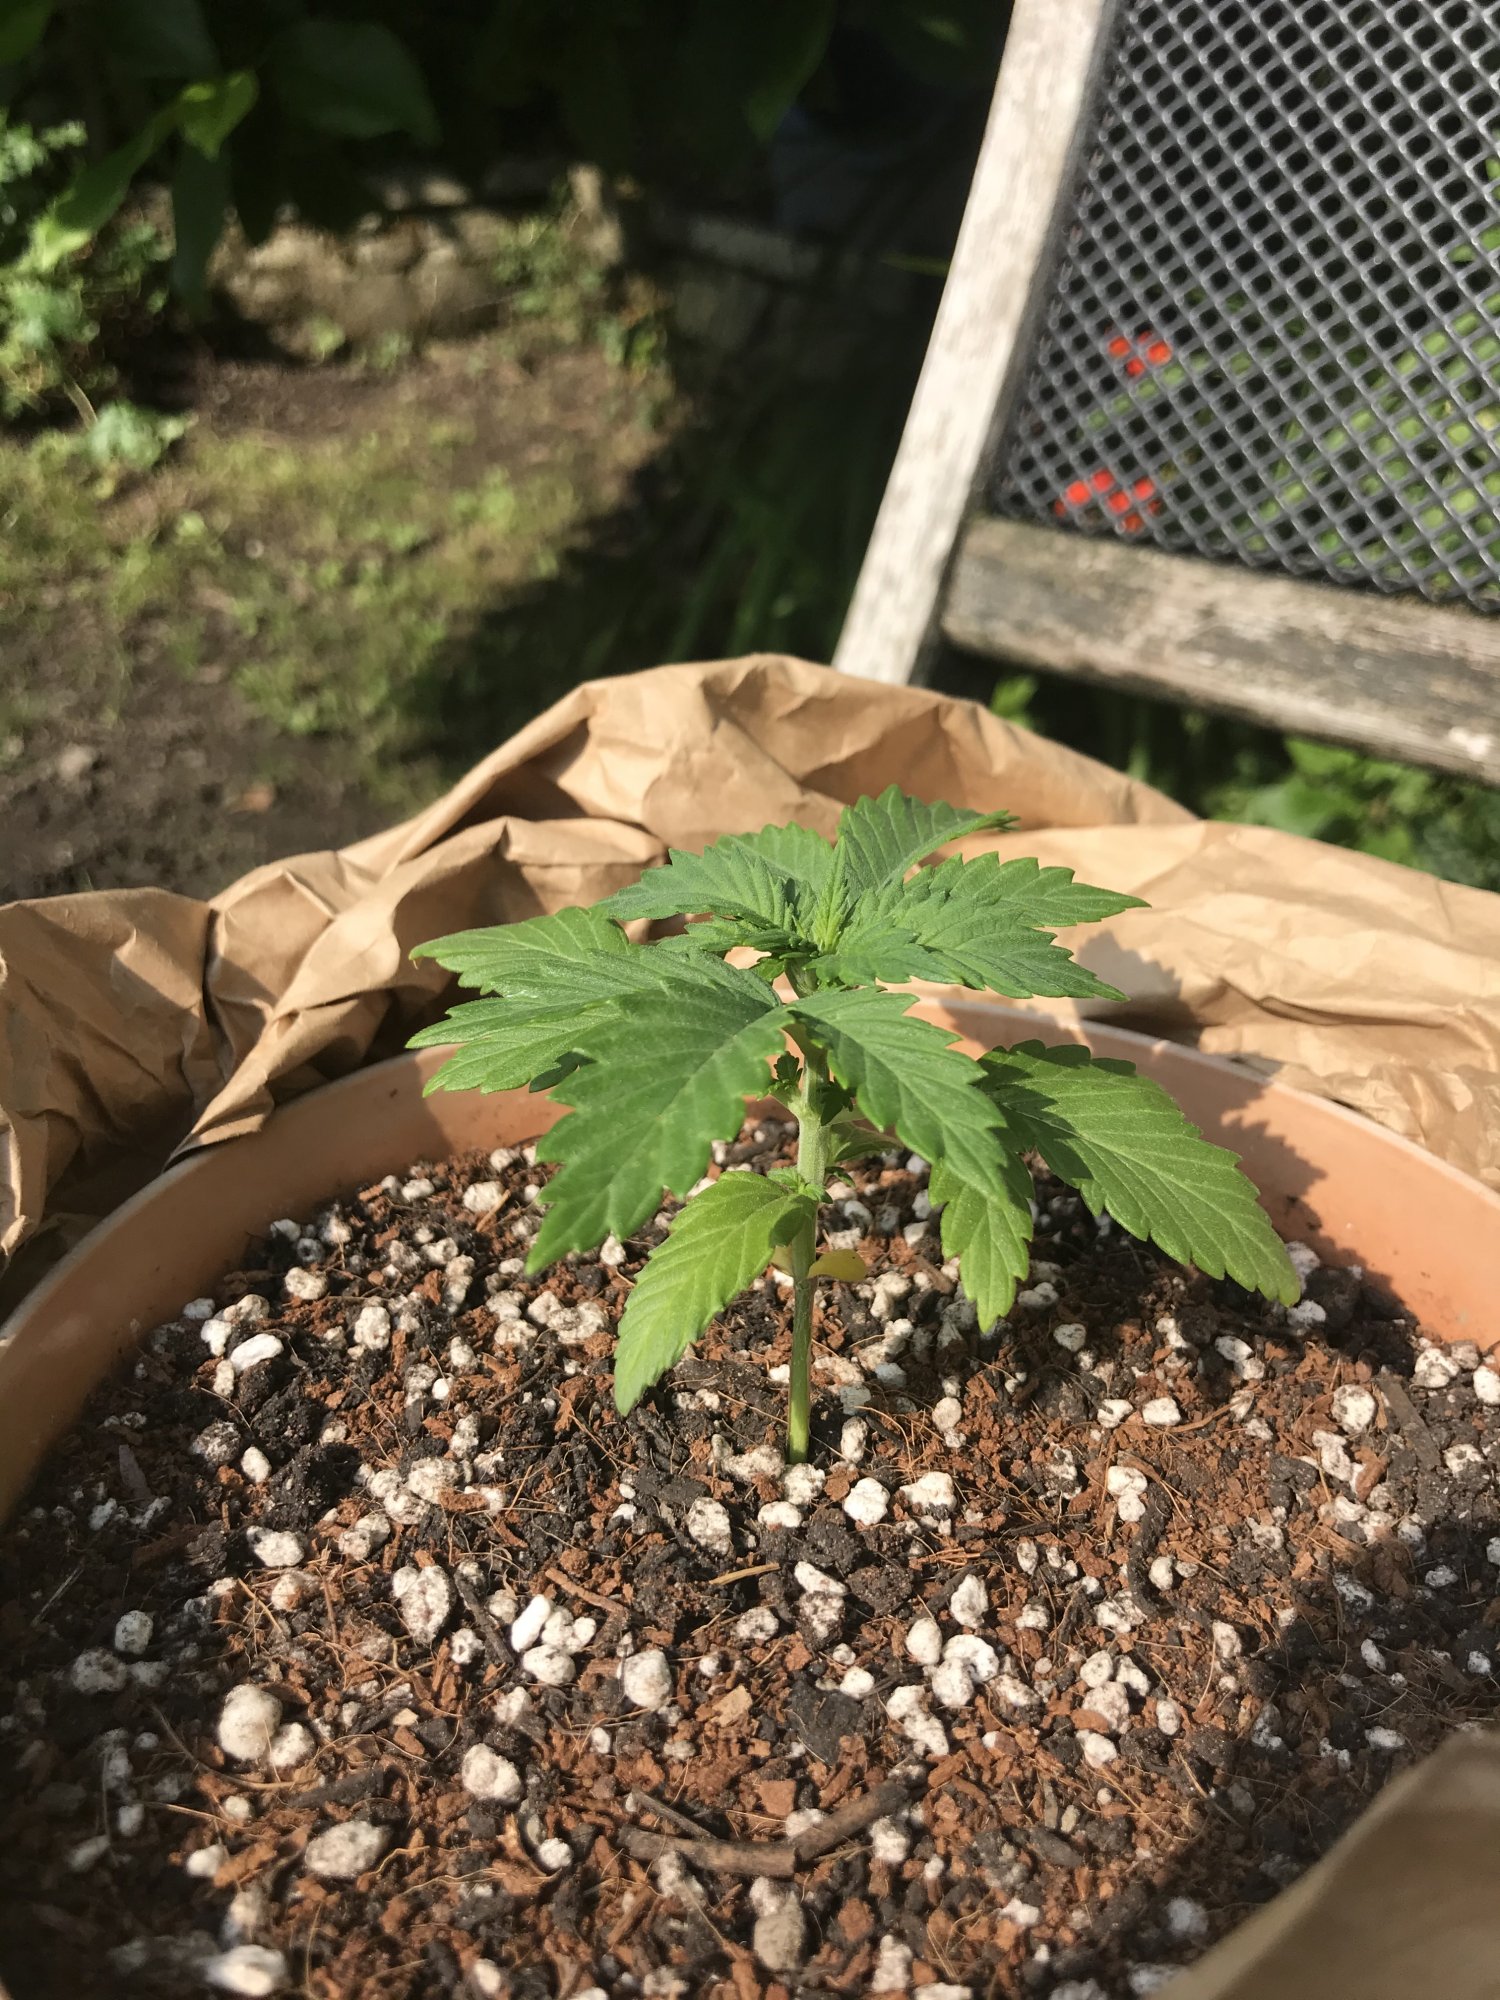 Old leaves are lighter green than new growth after pot transfer first grow 25 says